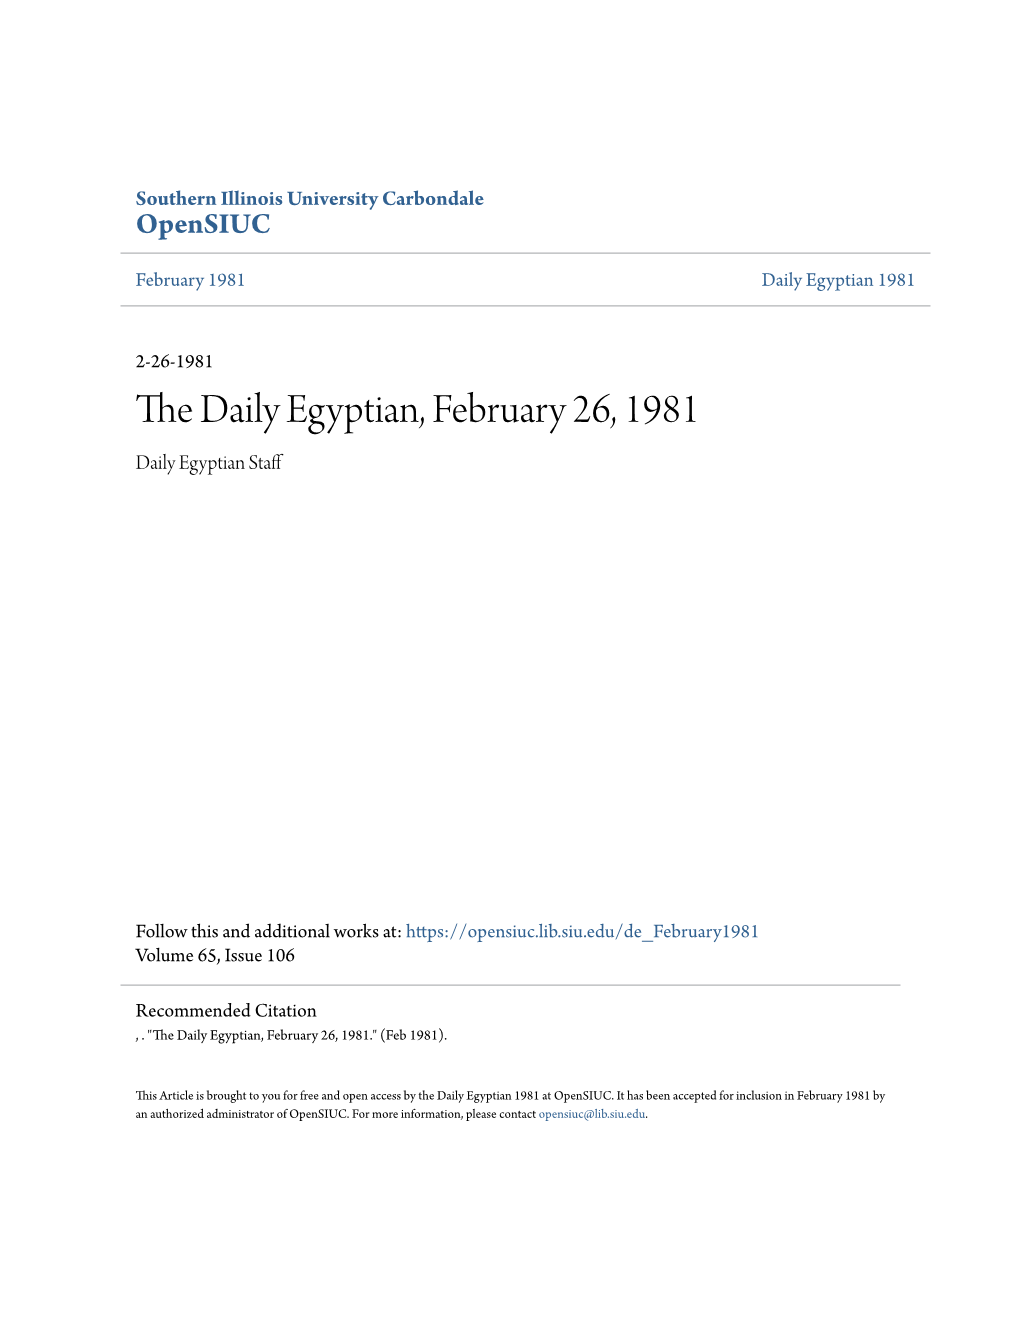 The Daily Egyptian, February 26, 1981